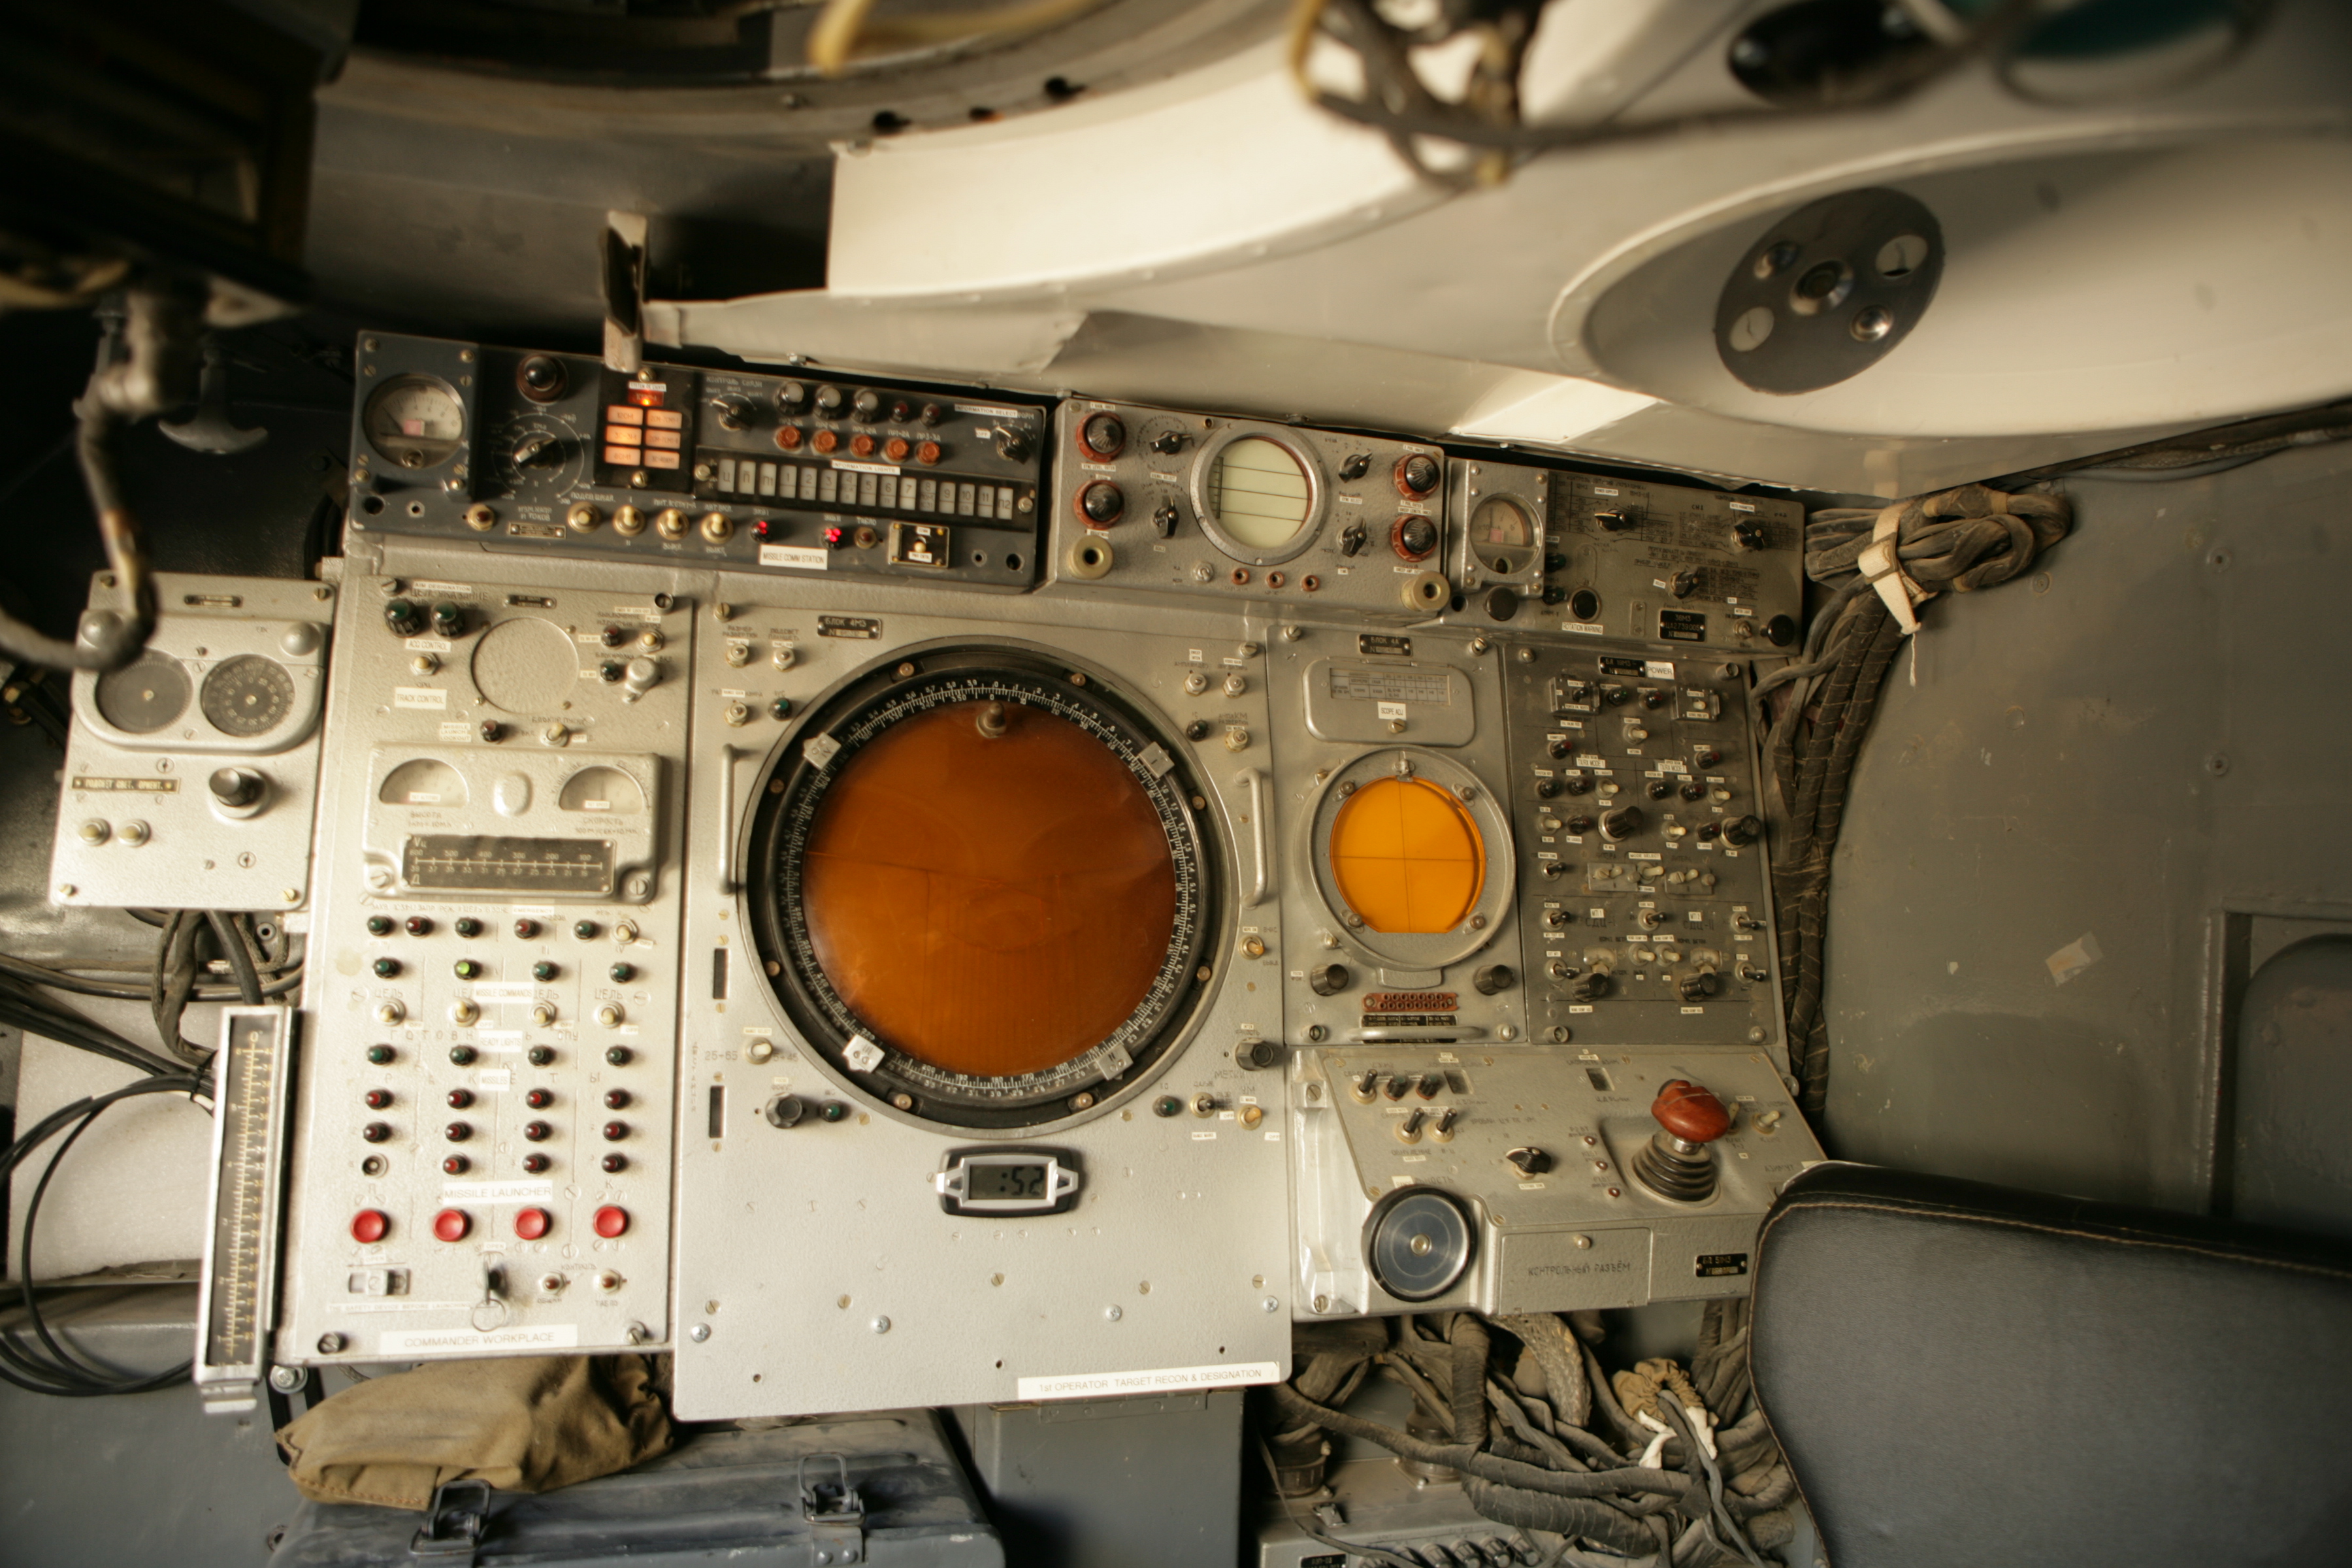 1S91_missile_guidance_system_control_station.JPG